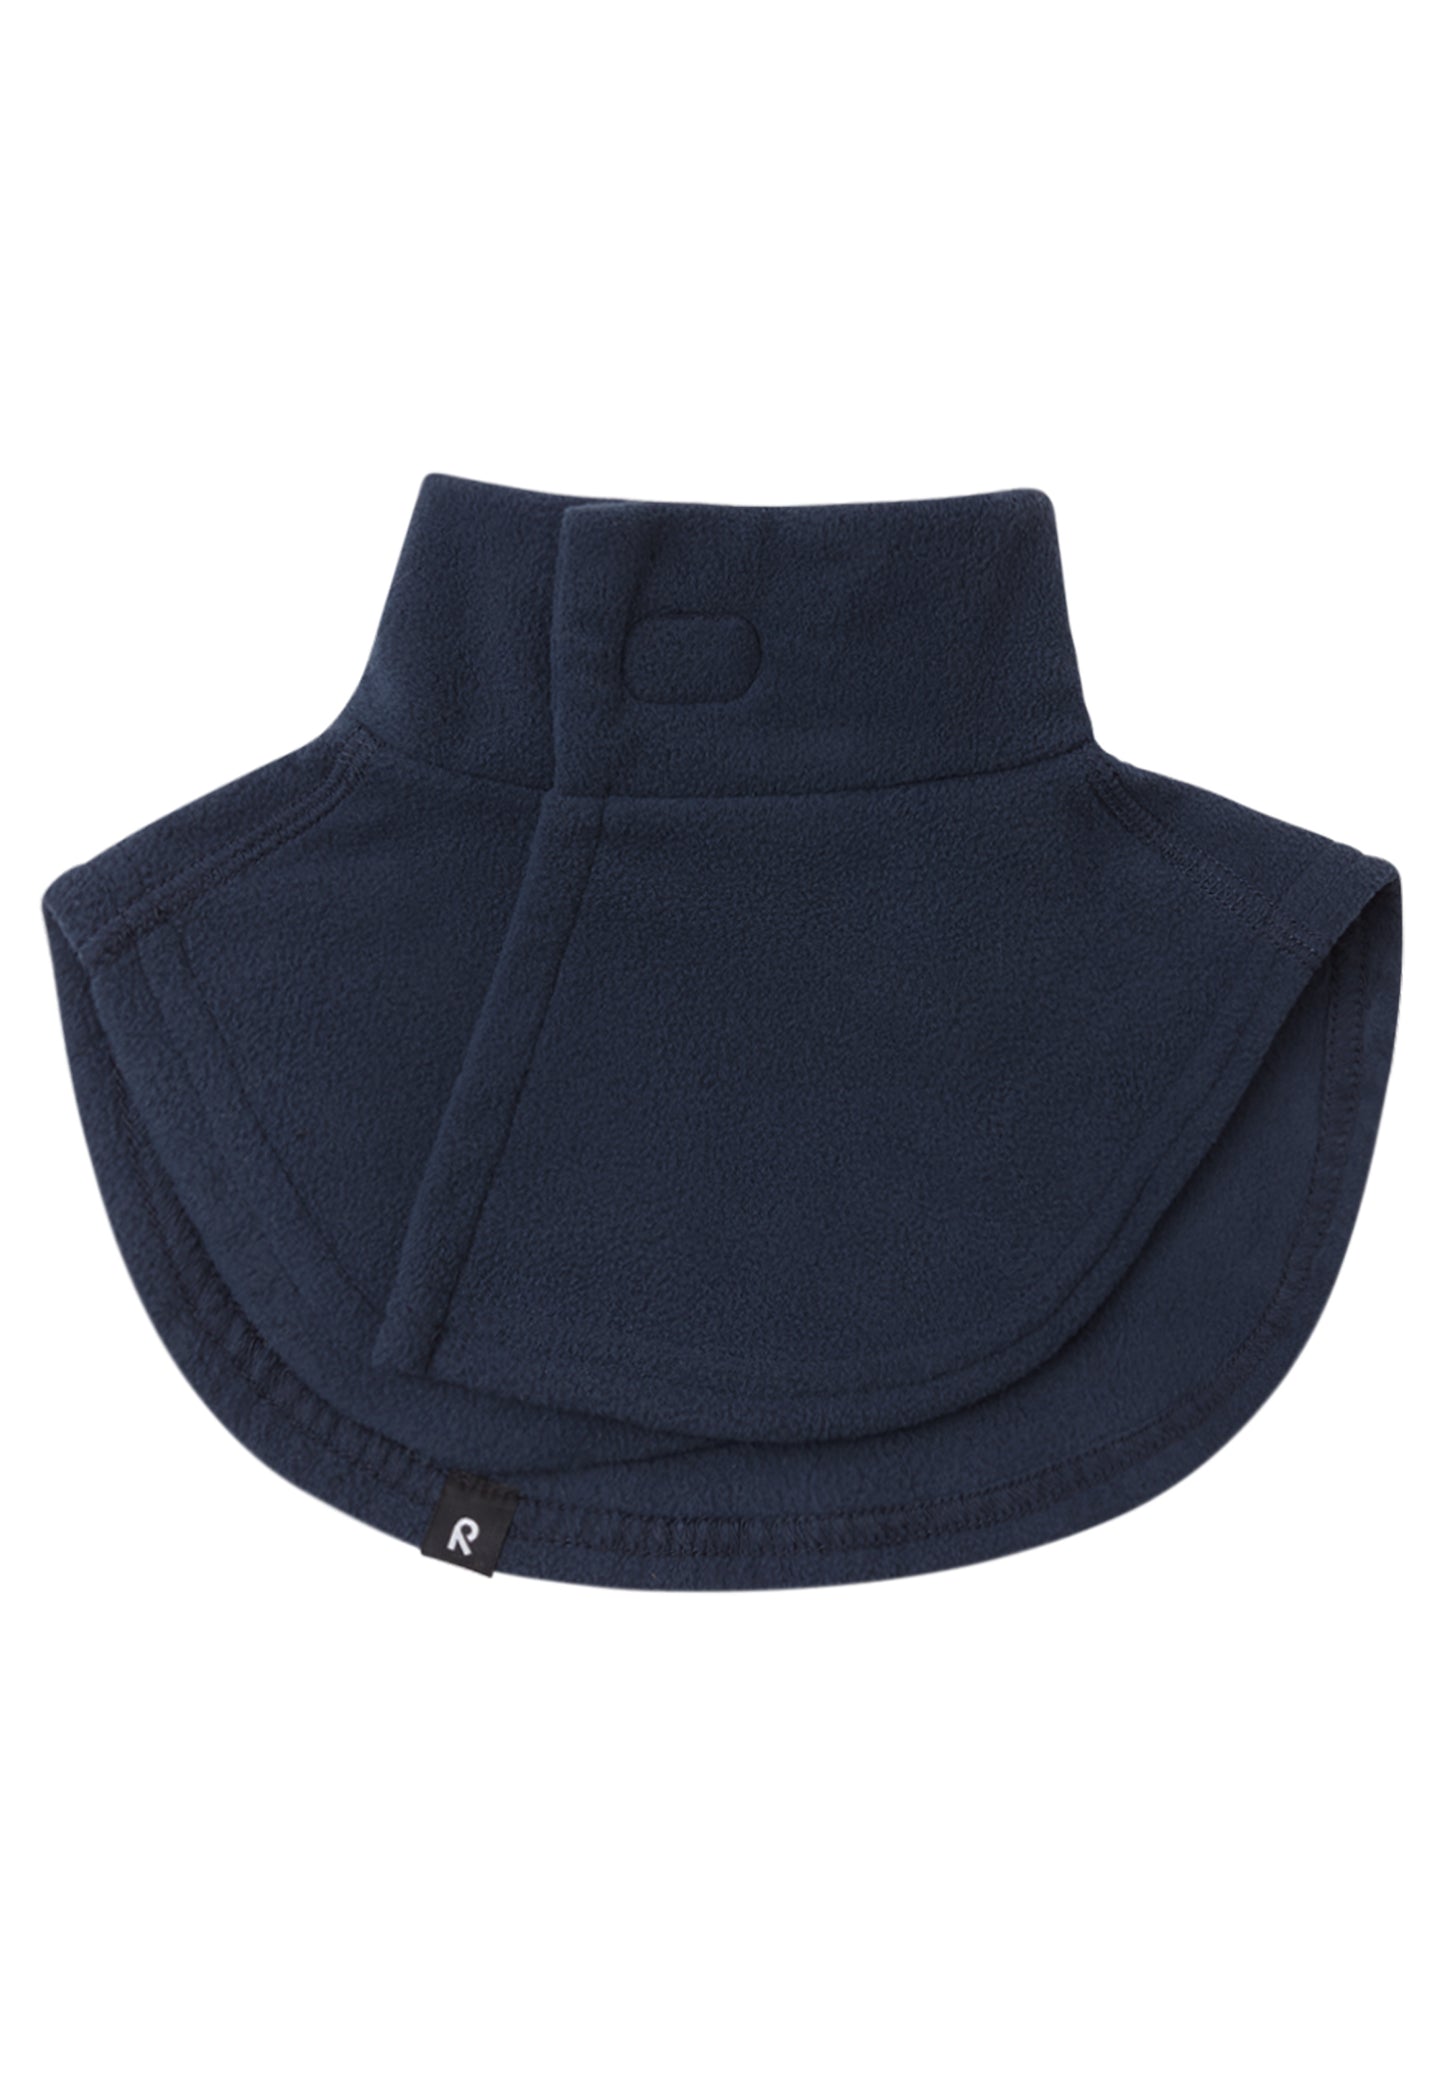 Reima neck warmer / Neck warmer Dollart / Legenda 528639 <br>One size fits all<br> high quality microfleece fleece<br> warms neck and shoulder area, with Velcro fastener